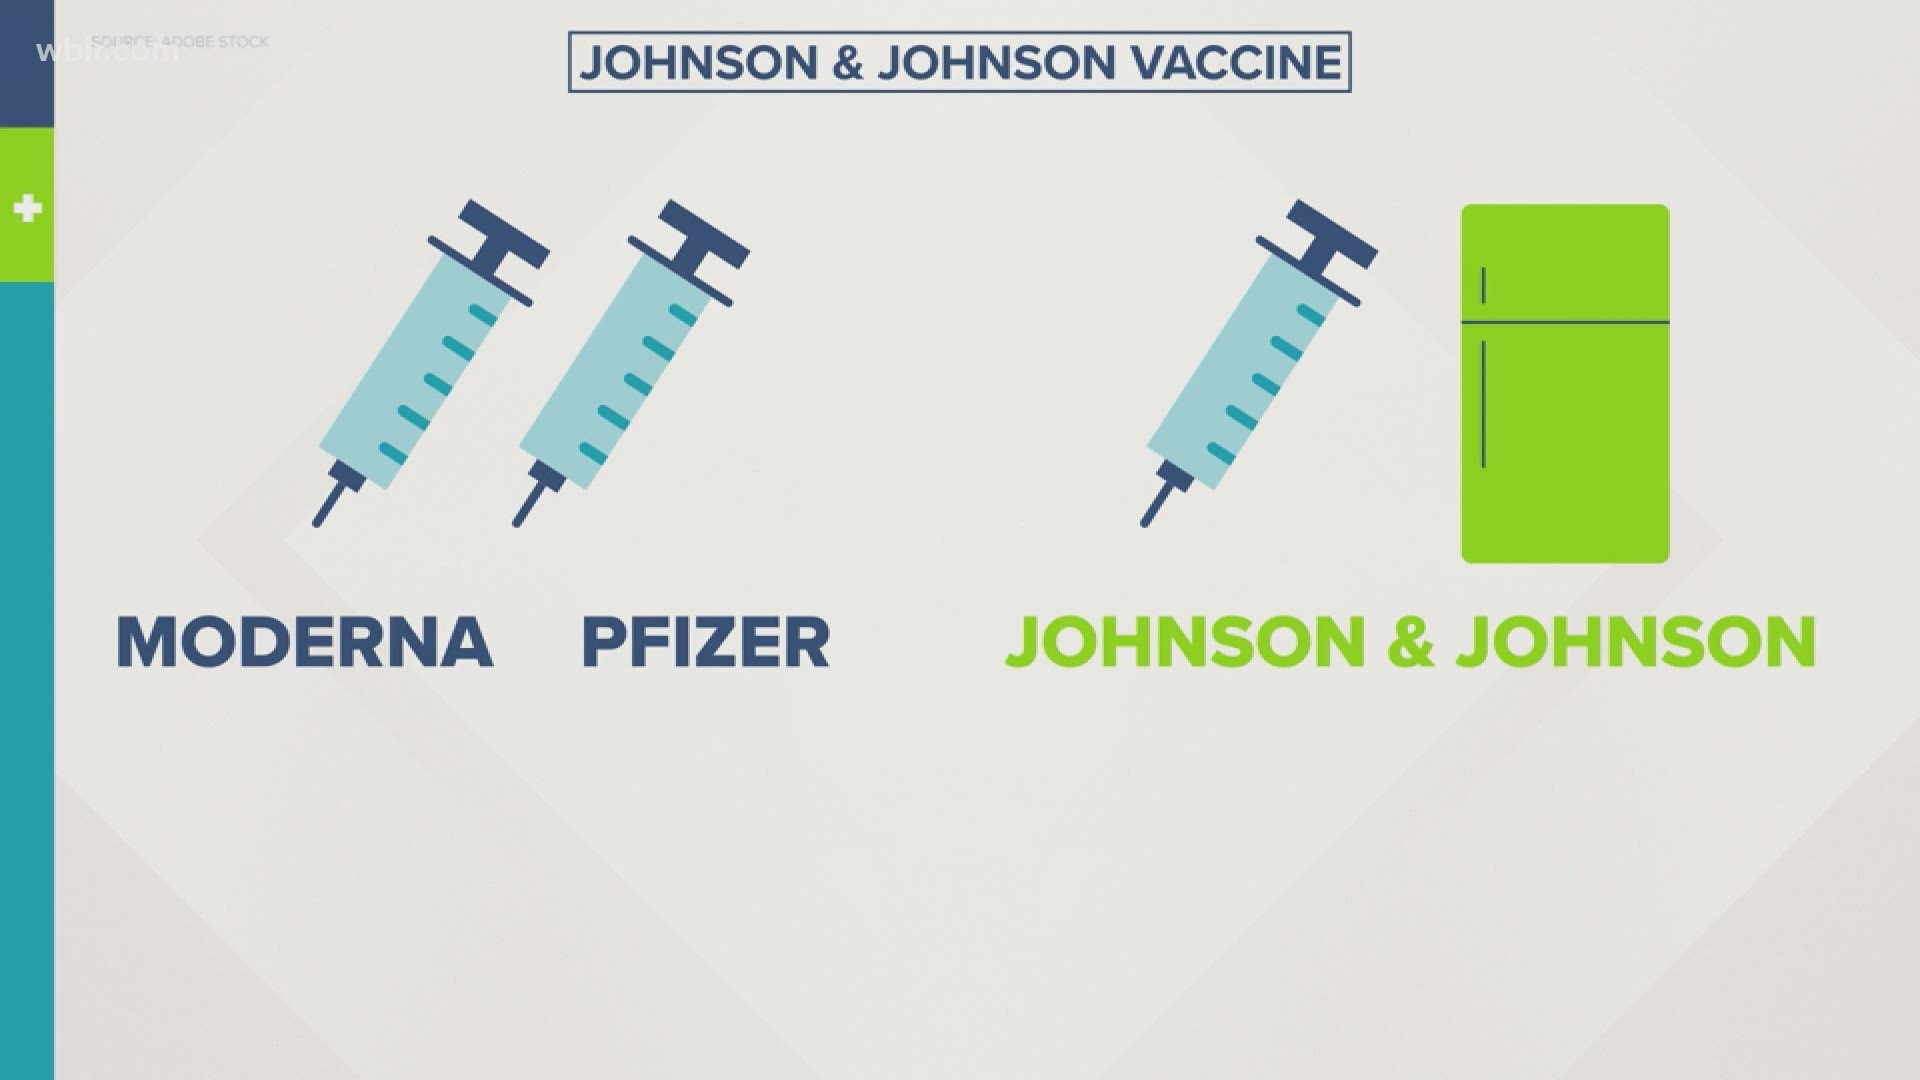 THERE ARE NOW THREE VACCINES AUTHORIZED TO HELP FIGHT COVID-19: MODERNA, PFIZER, AND JOHNSON & JOHNSON.